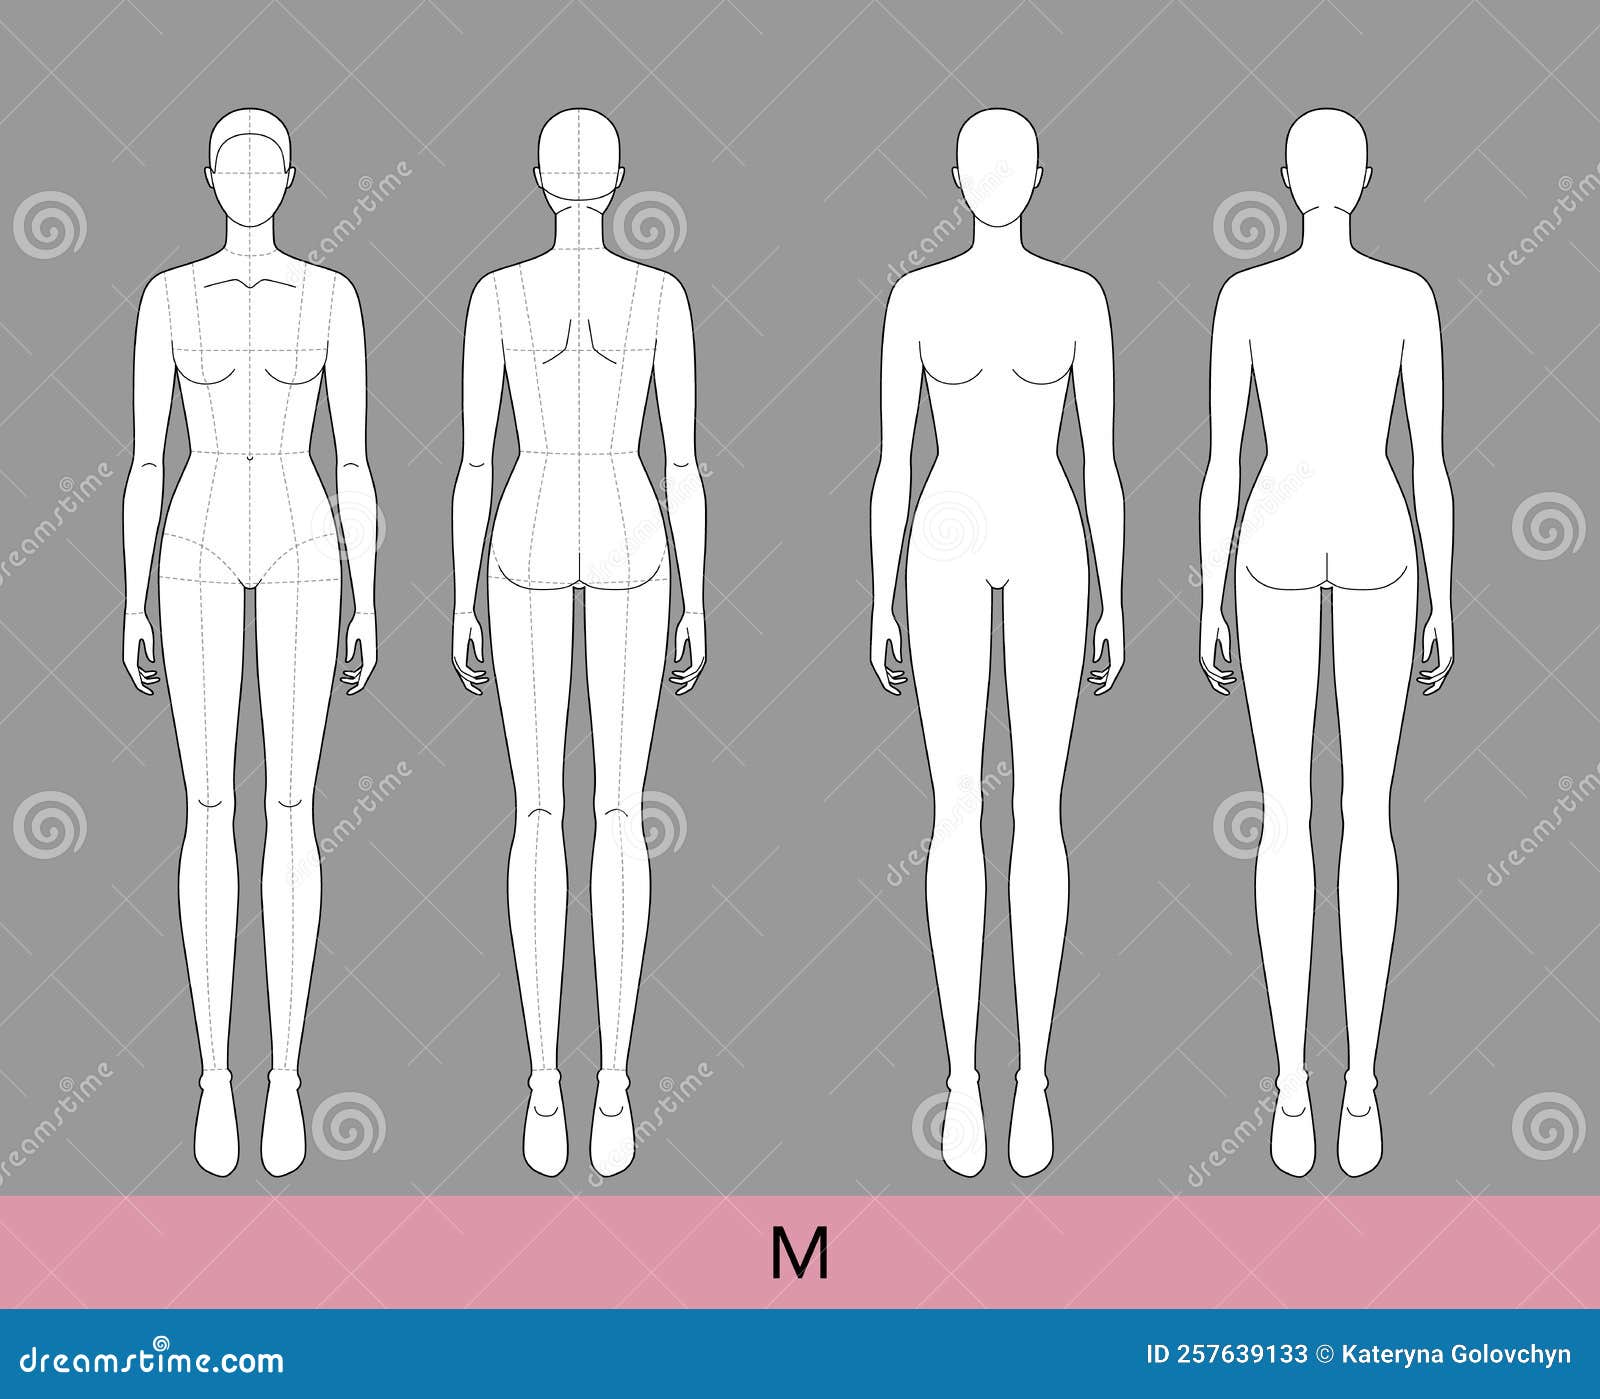 m size women fashion template 9 nine head croquis lady with and without main lines model skinny body figure front back